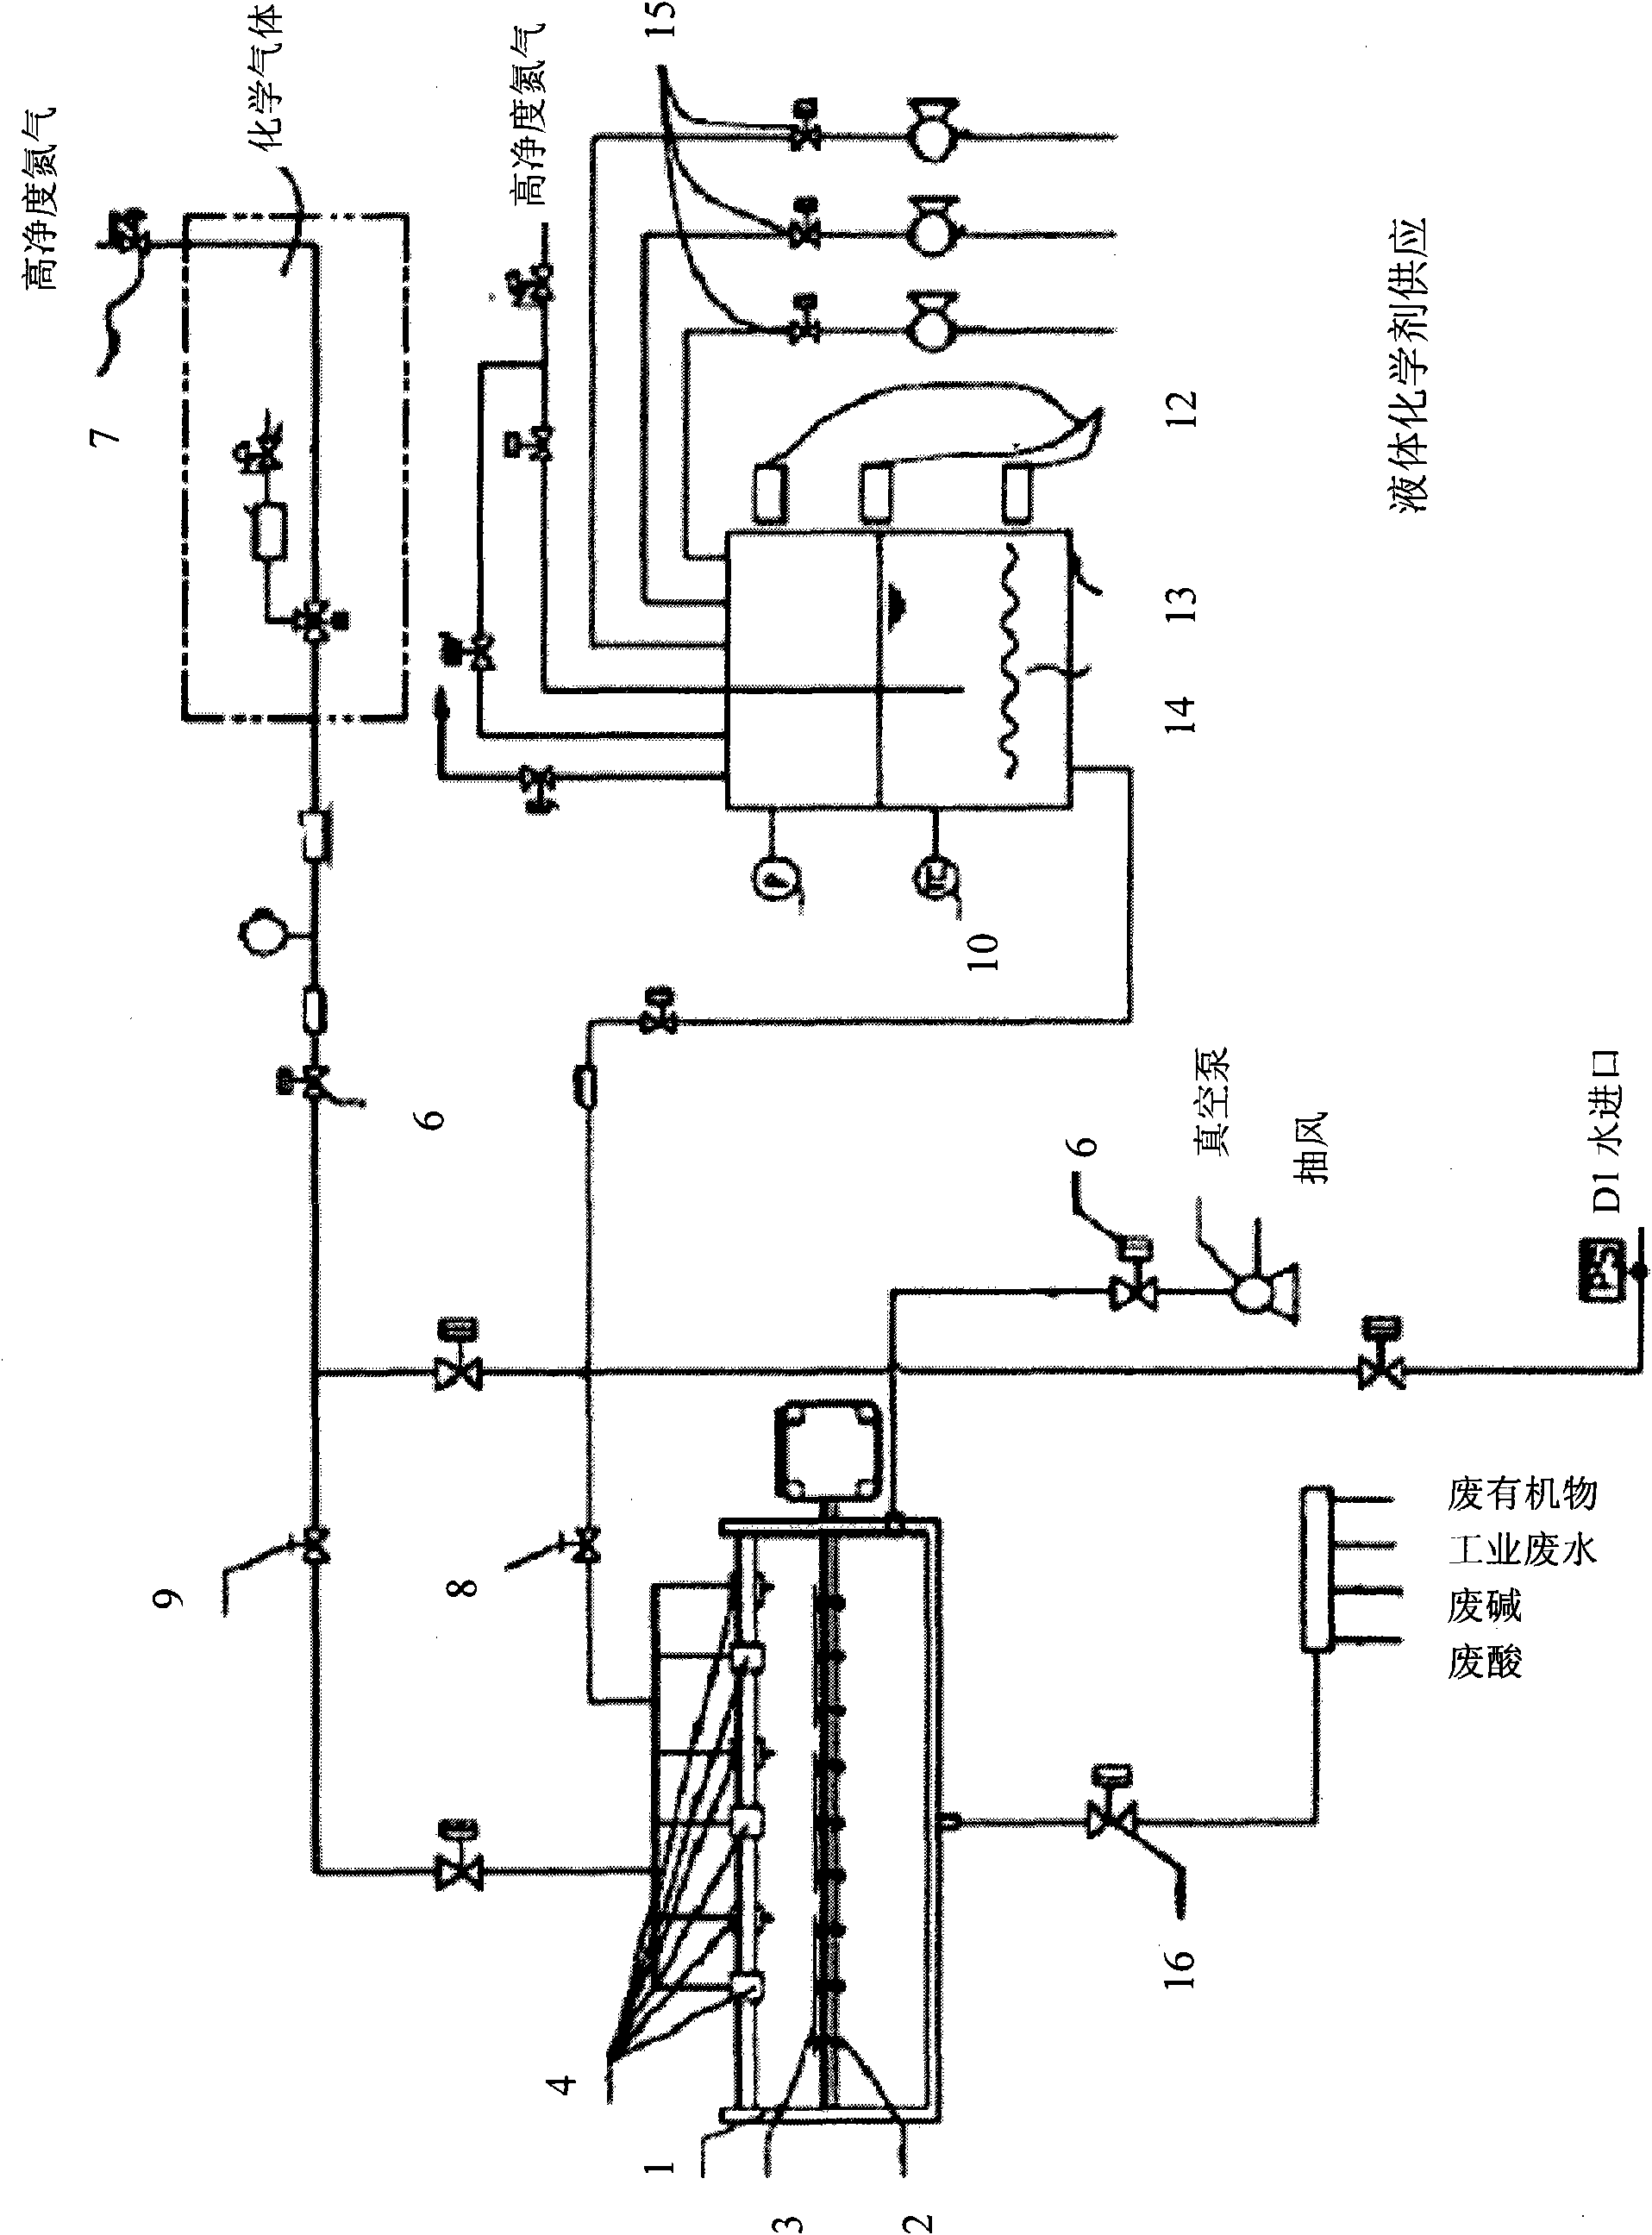 System and method for performing single-side continuous chemical wet treatment by using mist chemical agent